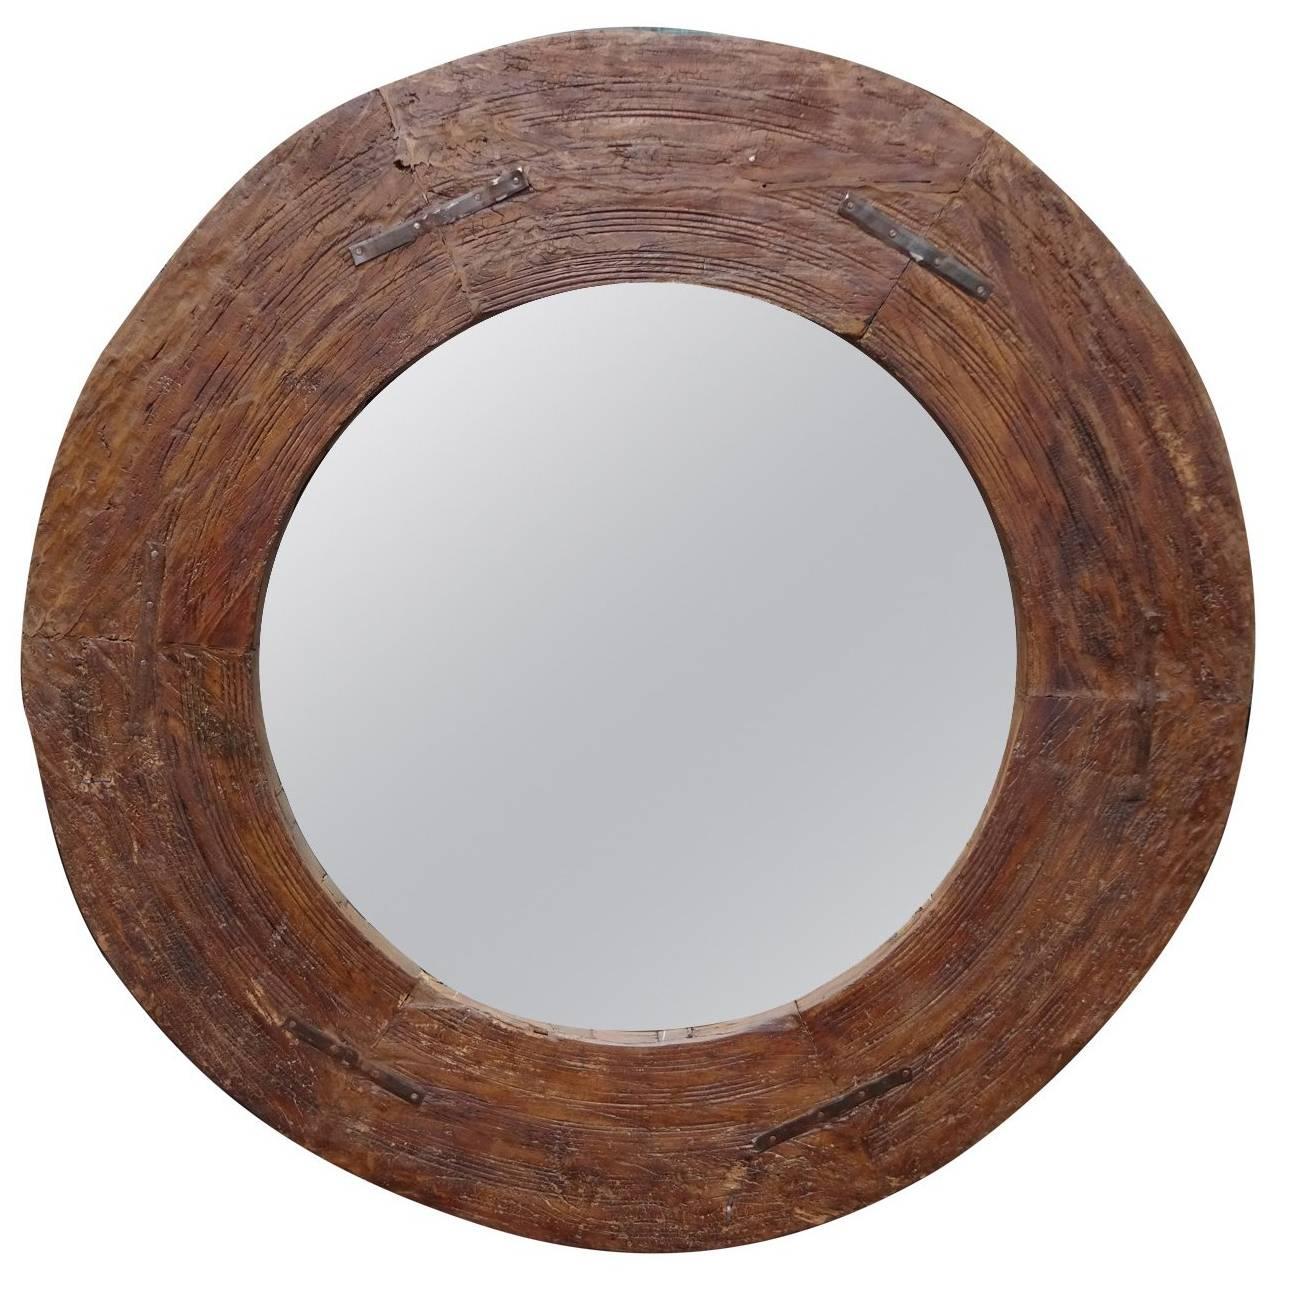 Rustic Iron and Wood Circular Mirror For Sale